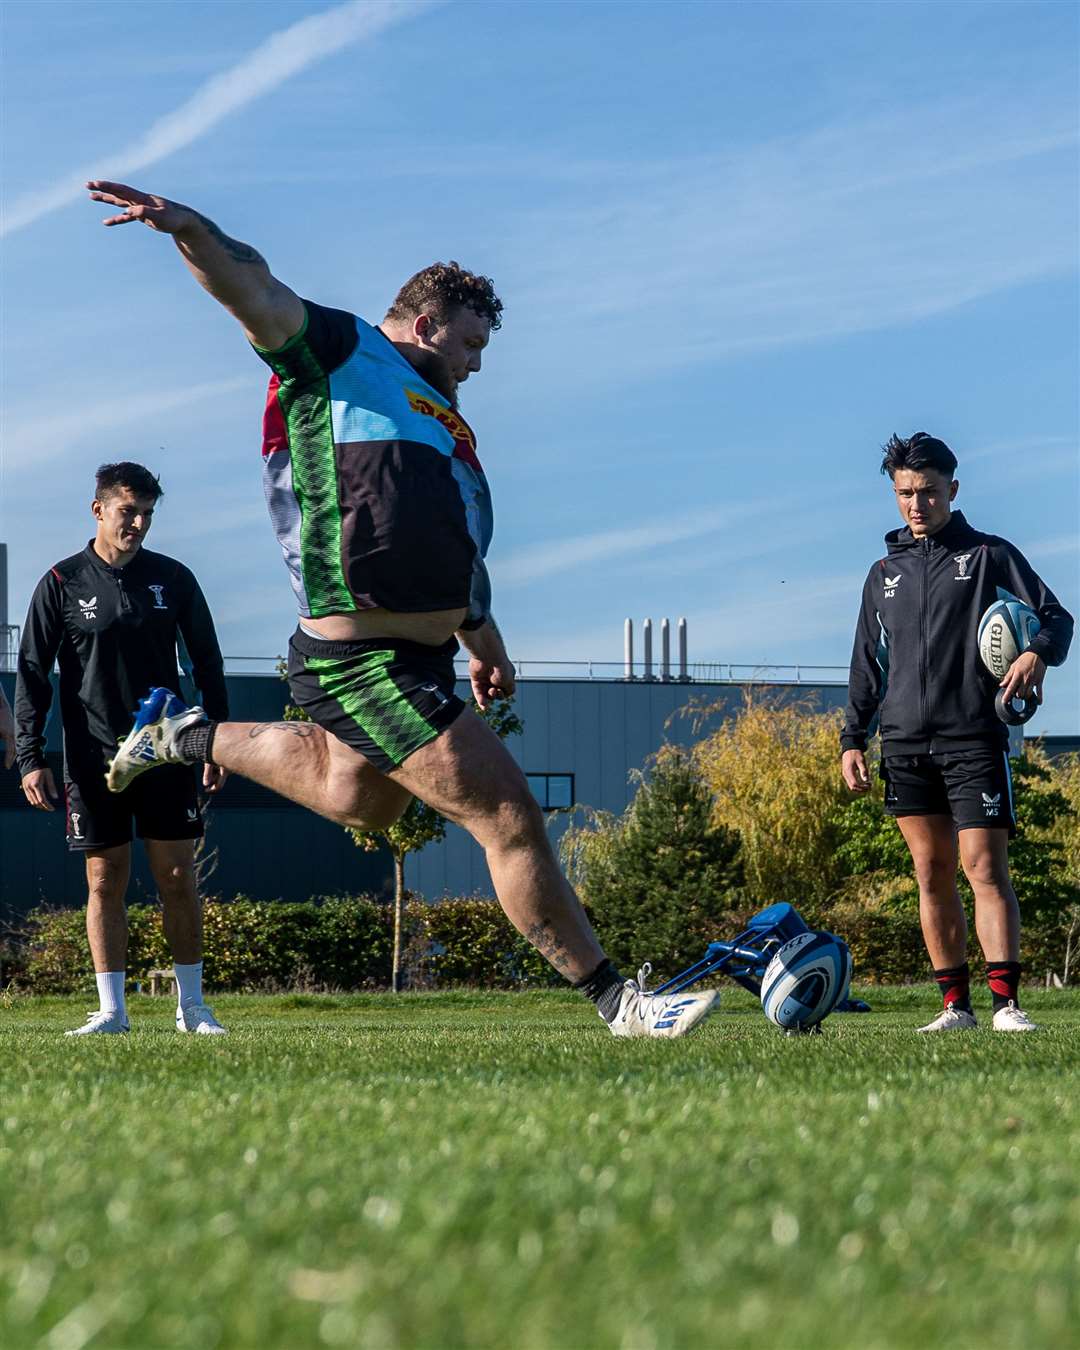 Tom lines up a kick during training, discovering it's not as easy as it looks!